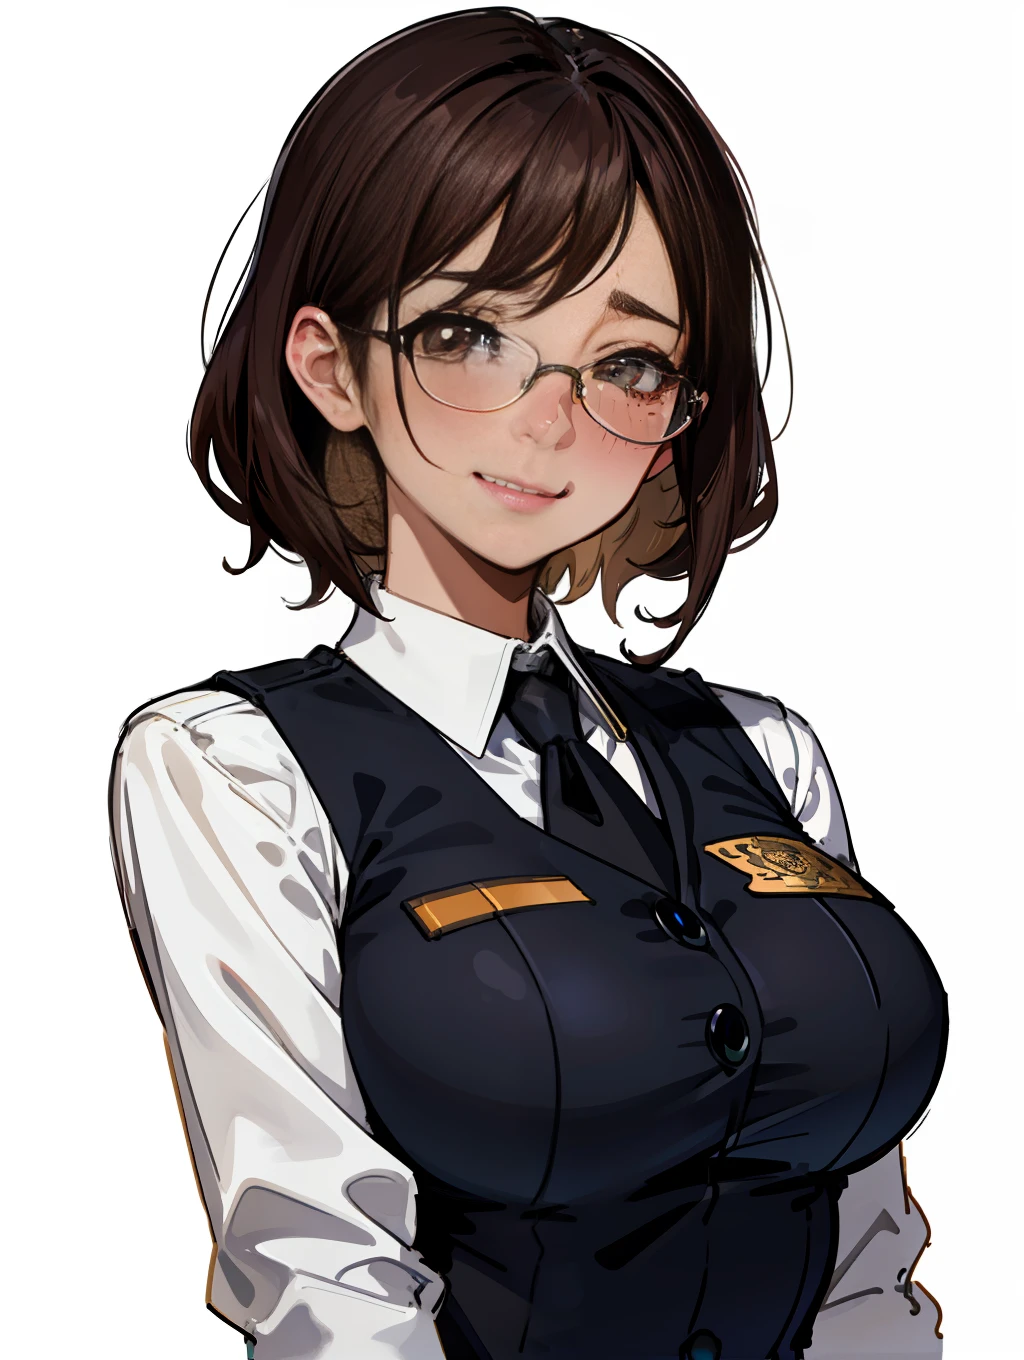 master-piece, hyper quality, hyper detailed, perfect drawing, solo, beauty, bountiful breasts, fluffy breasts, H cup bust, bust up, bulging bust top, blush, sweat, moist eyes, detailed drawing, accurate drawing, police officer, vest, uniform, special, glasses, brown tanned skin, slit eyes, long eyelashes, Cheeky smile